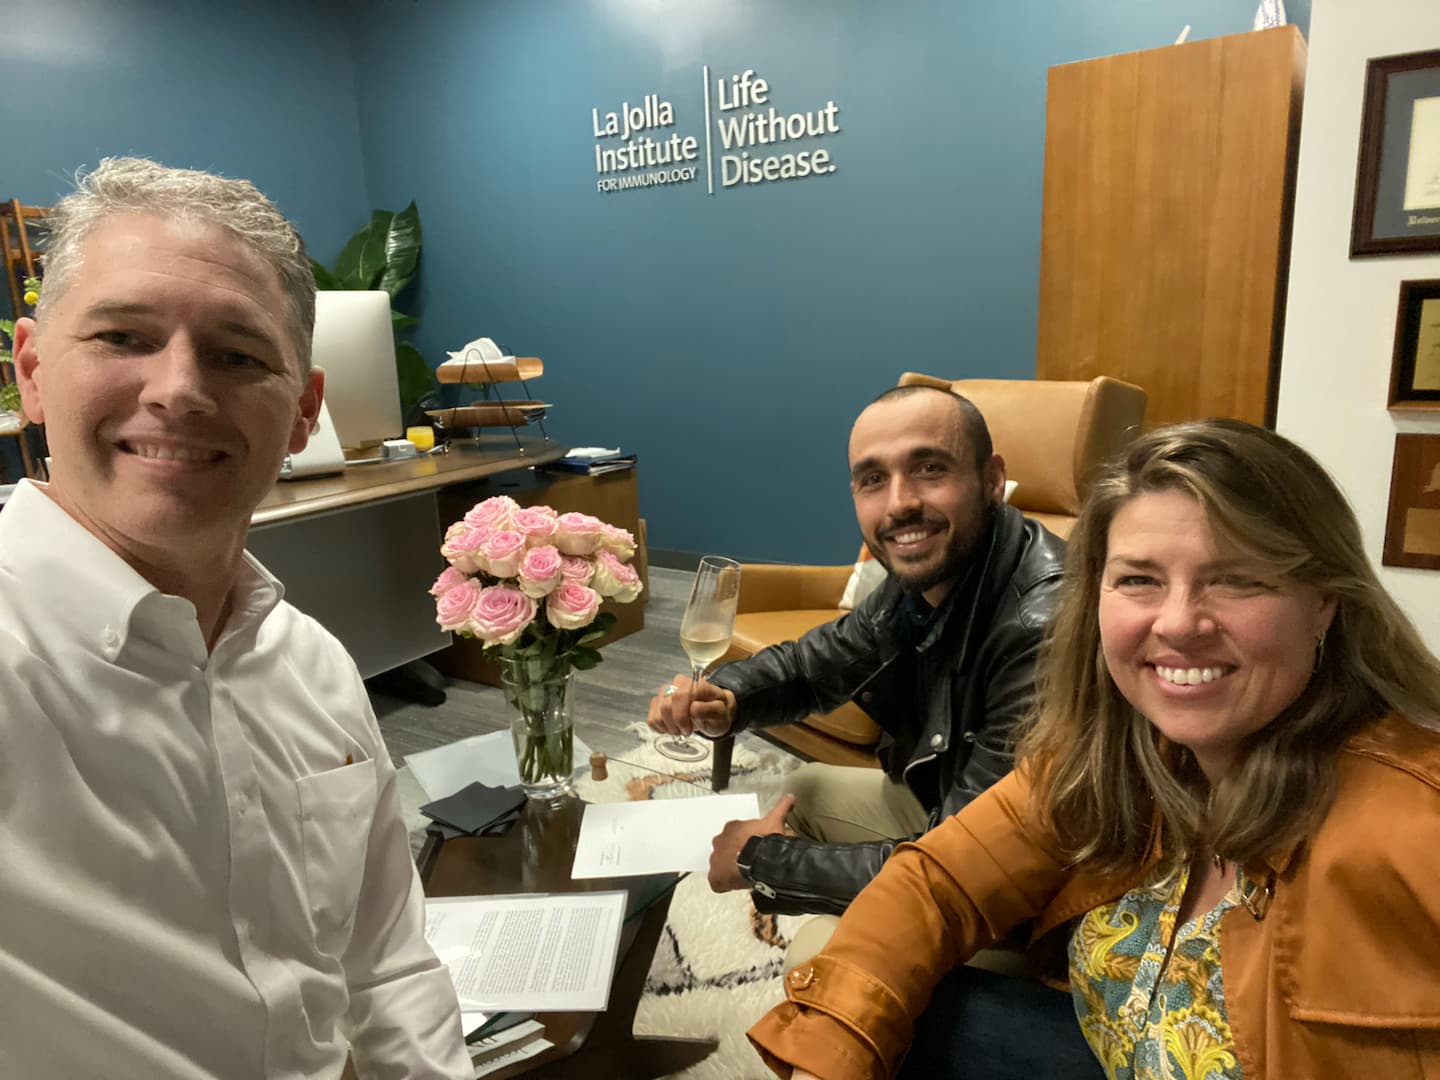 Reina (center) signs his agreement to join the LJI faculty with LJI Professor and Chief Scientific Officer Shane Crotty, Ph.D. (left) and LJI Professor, President, and CEO Erica Ollmann Saphire, Ph.D., MBA (left).